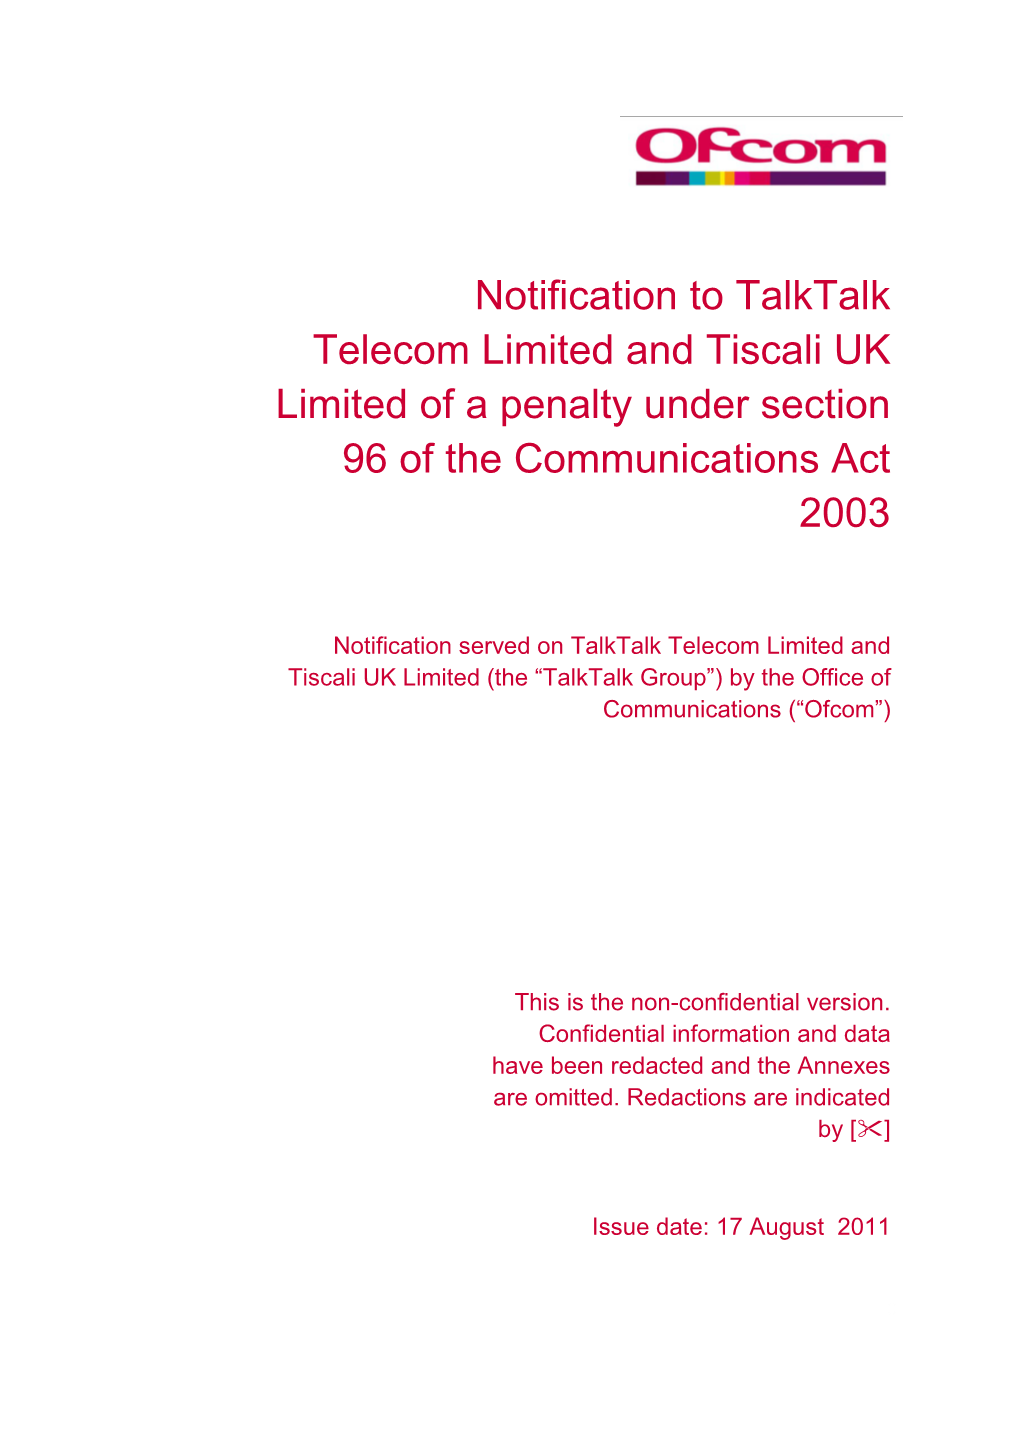 Notification to Talktalk Telecom Limited and Tiscali UK Limited of a Penalty Under Section 96 of the Communications Act 2003